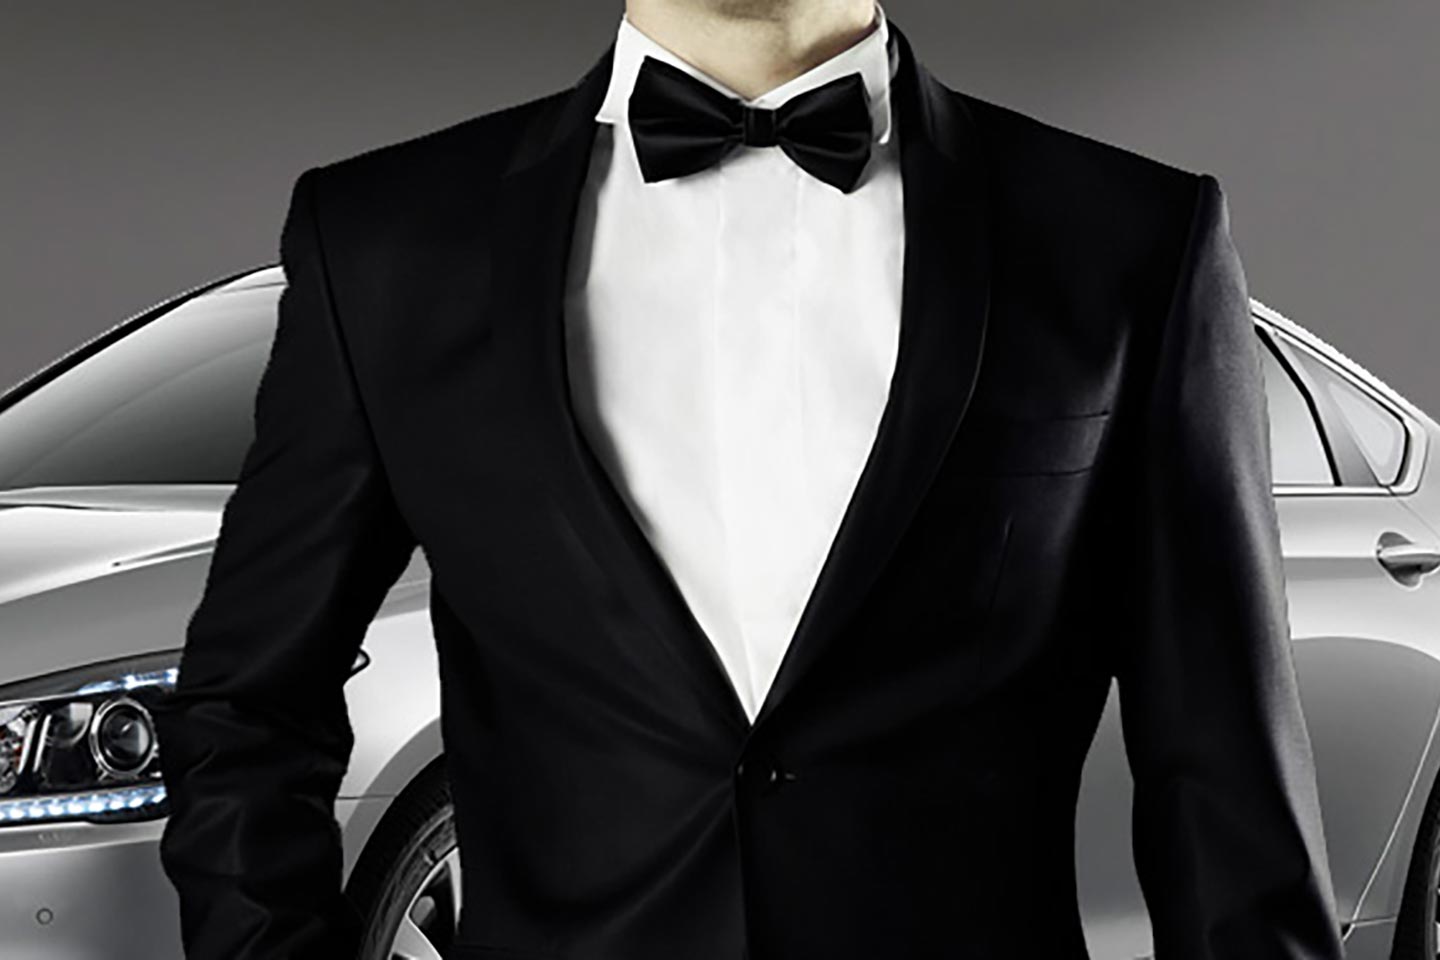 Man in tuxedo dressed as James Bond standing in front of car